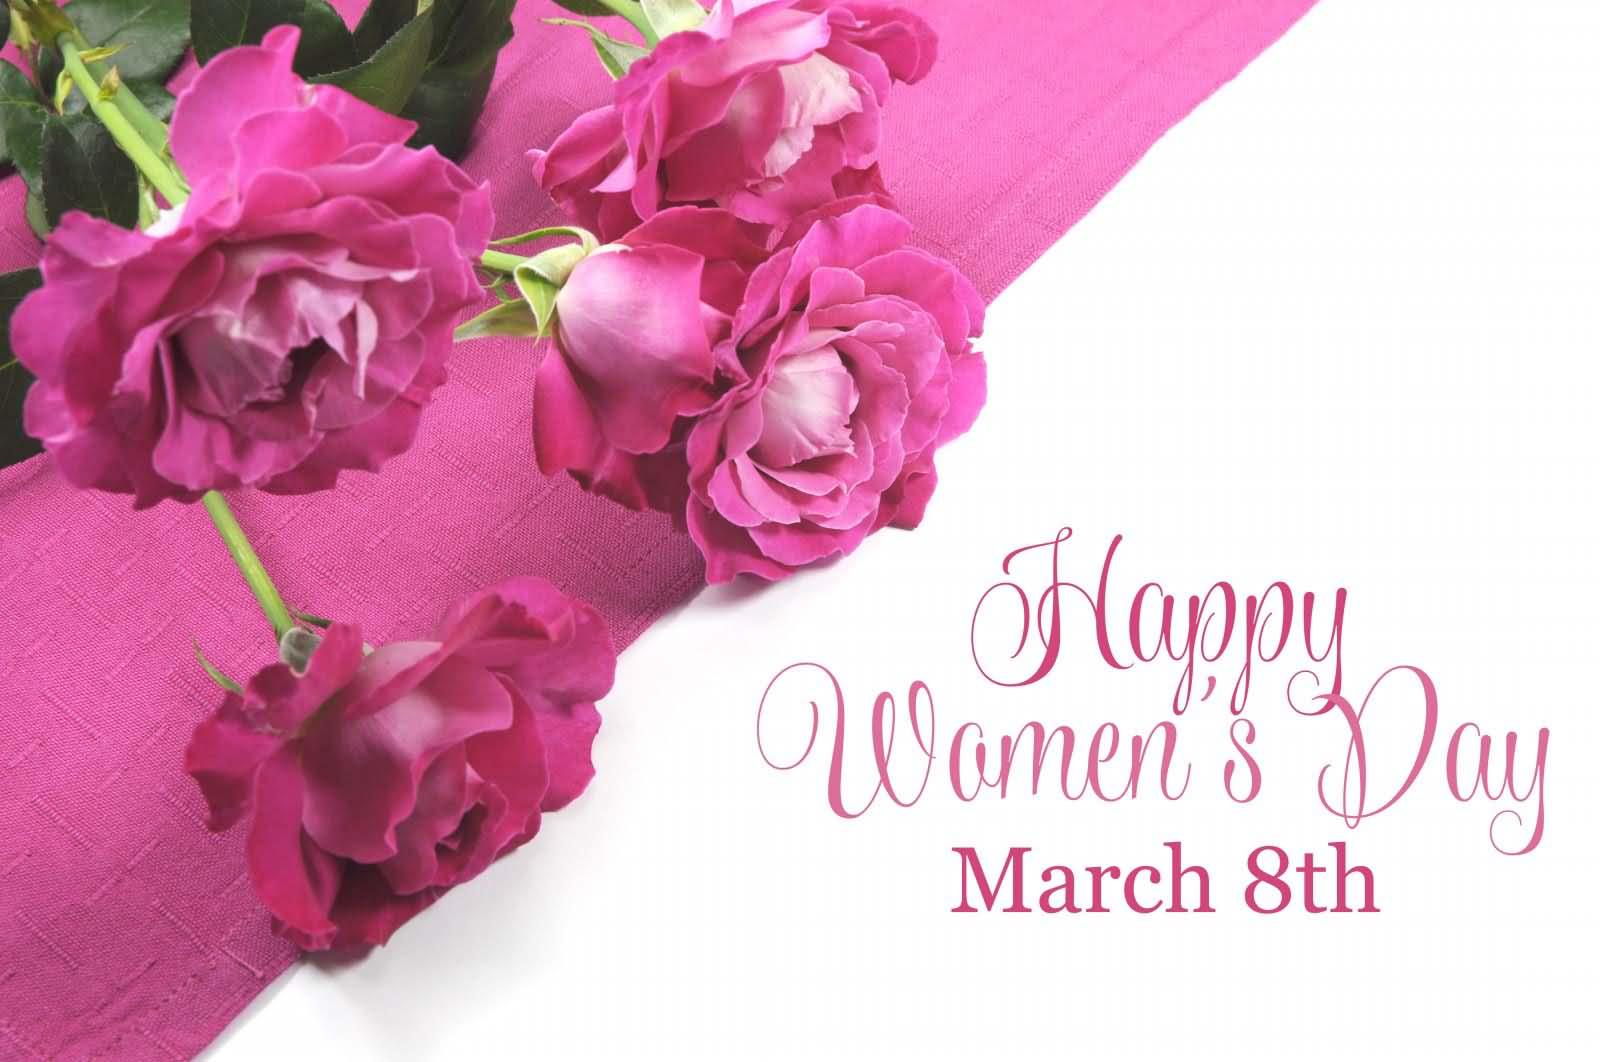 Women’s Day Images for Whatsapp DP, Profile Wallpapers – Free Download 